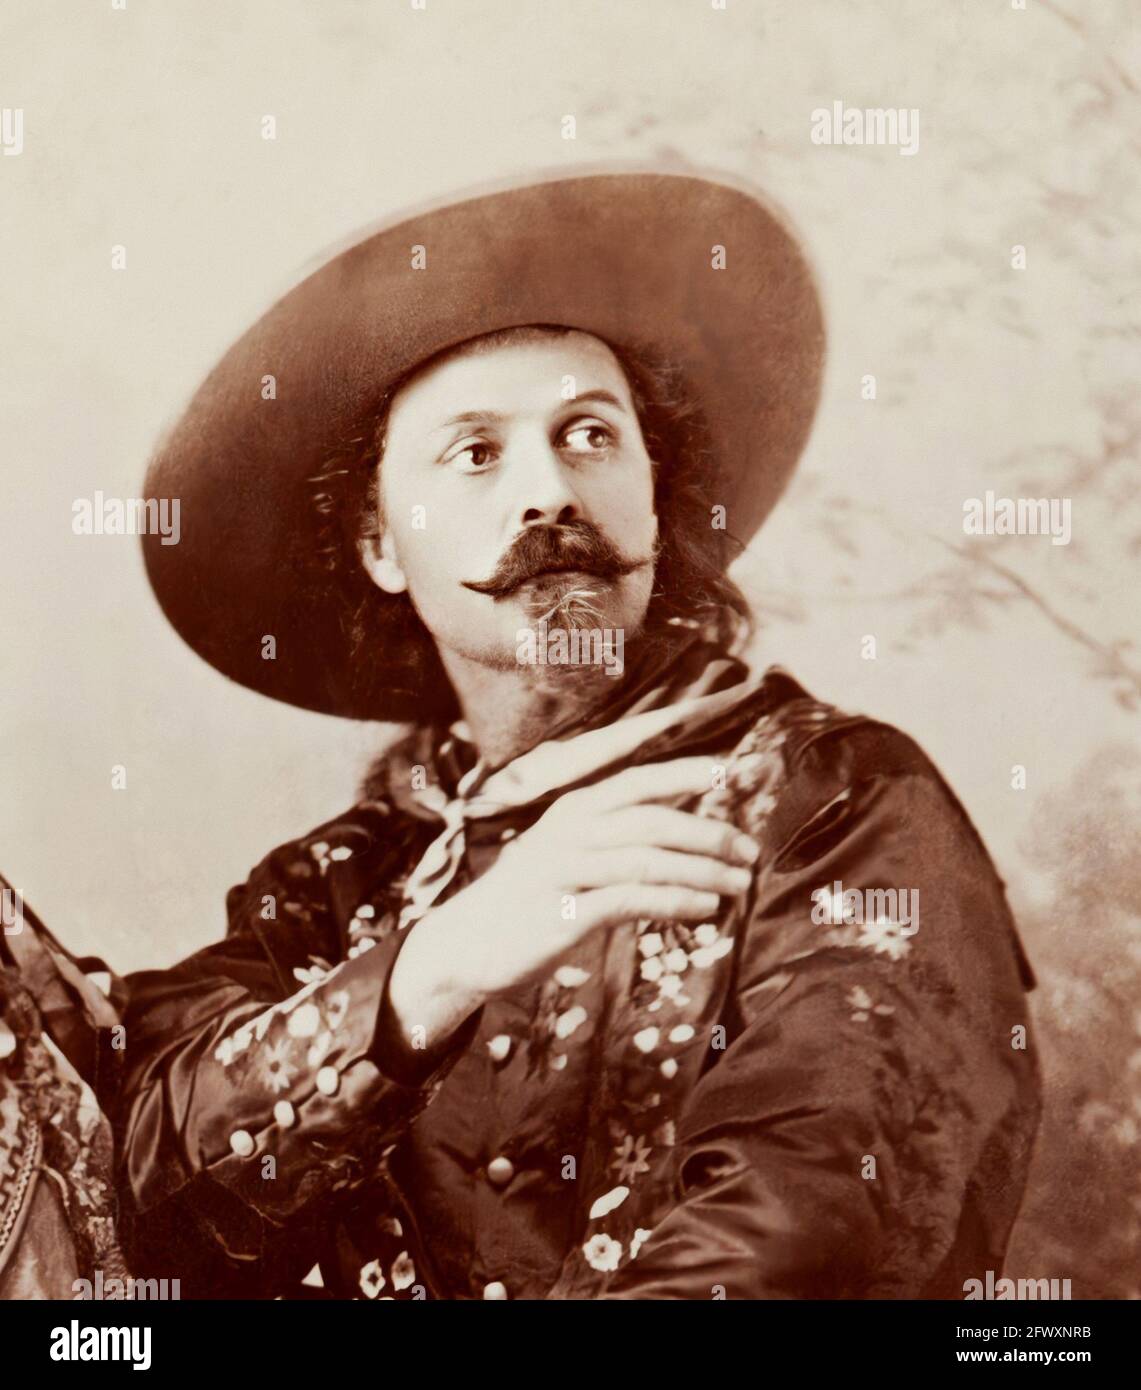 1880 ca , Montreal , CANADA : The celebrated Colonel William Frederick CODY  , know as BUFFALO BILL ( 1846 - 1917 ) at time of WILD WEST SHOW . Photo by